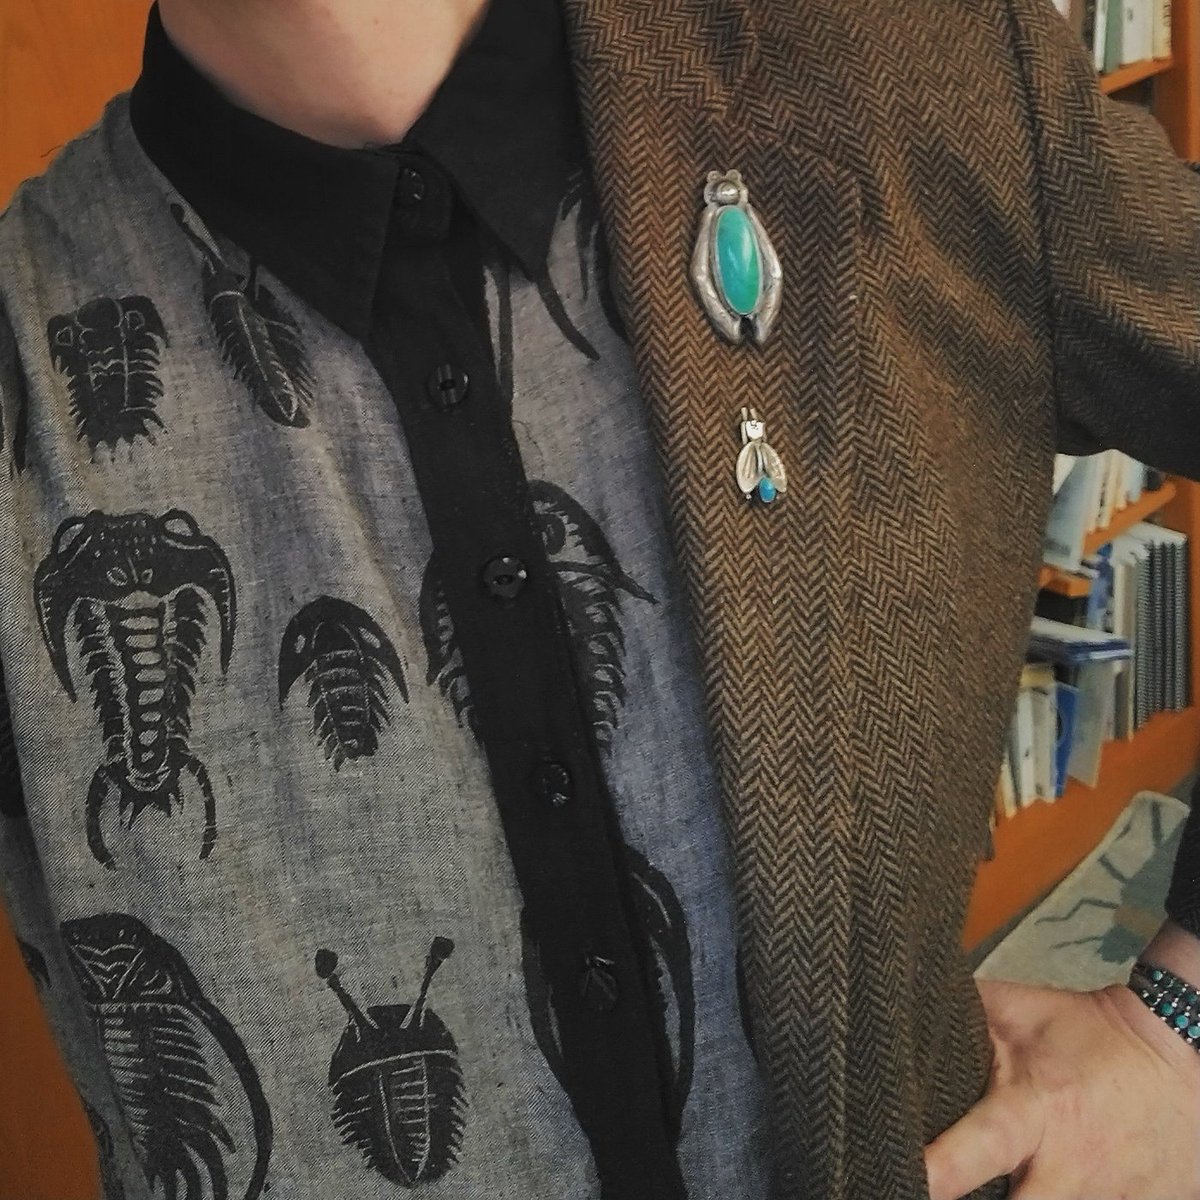 Another arthropod-themed outfit from this week. The trilobite top is hand-printed and sewn by me. Vintage insect turquoise brooches. #entofashion #entomofashion #sciencefashion